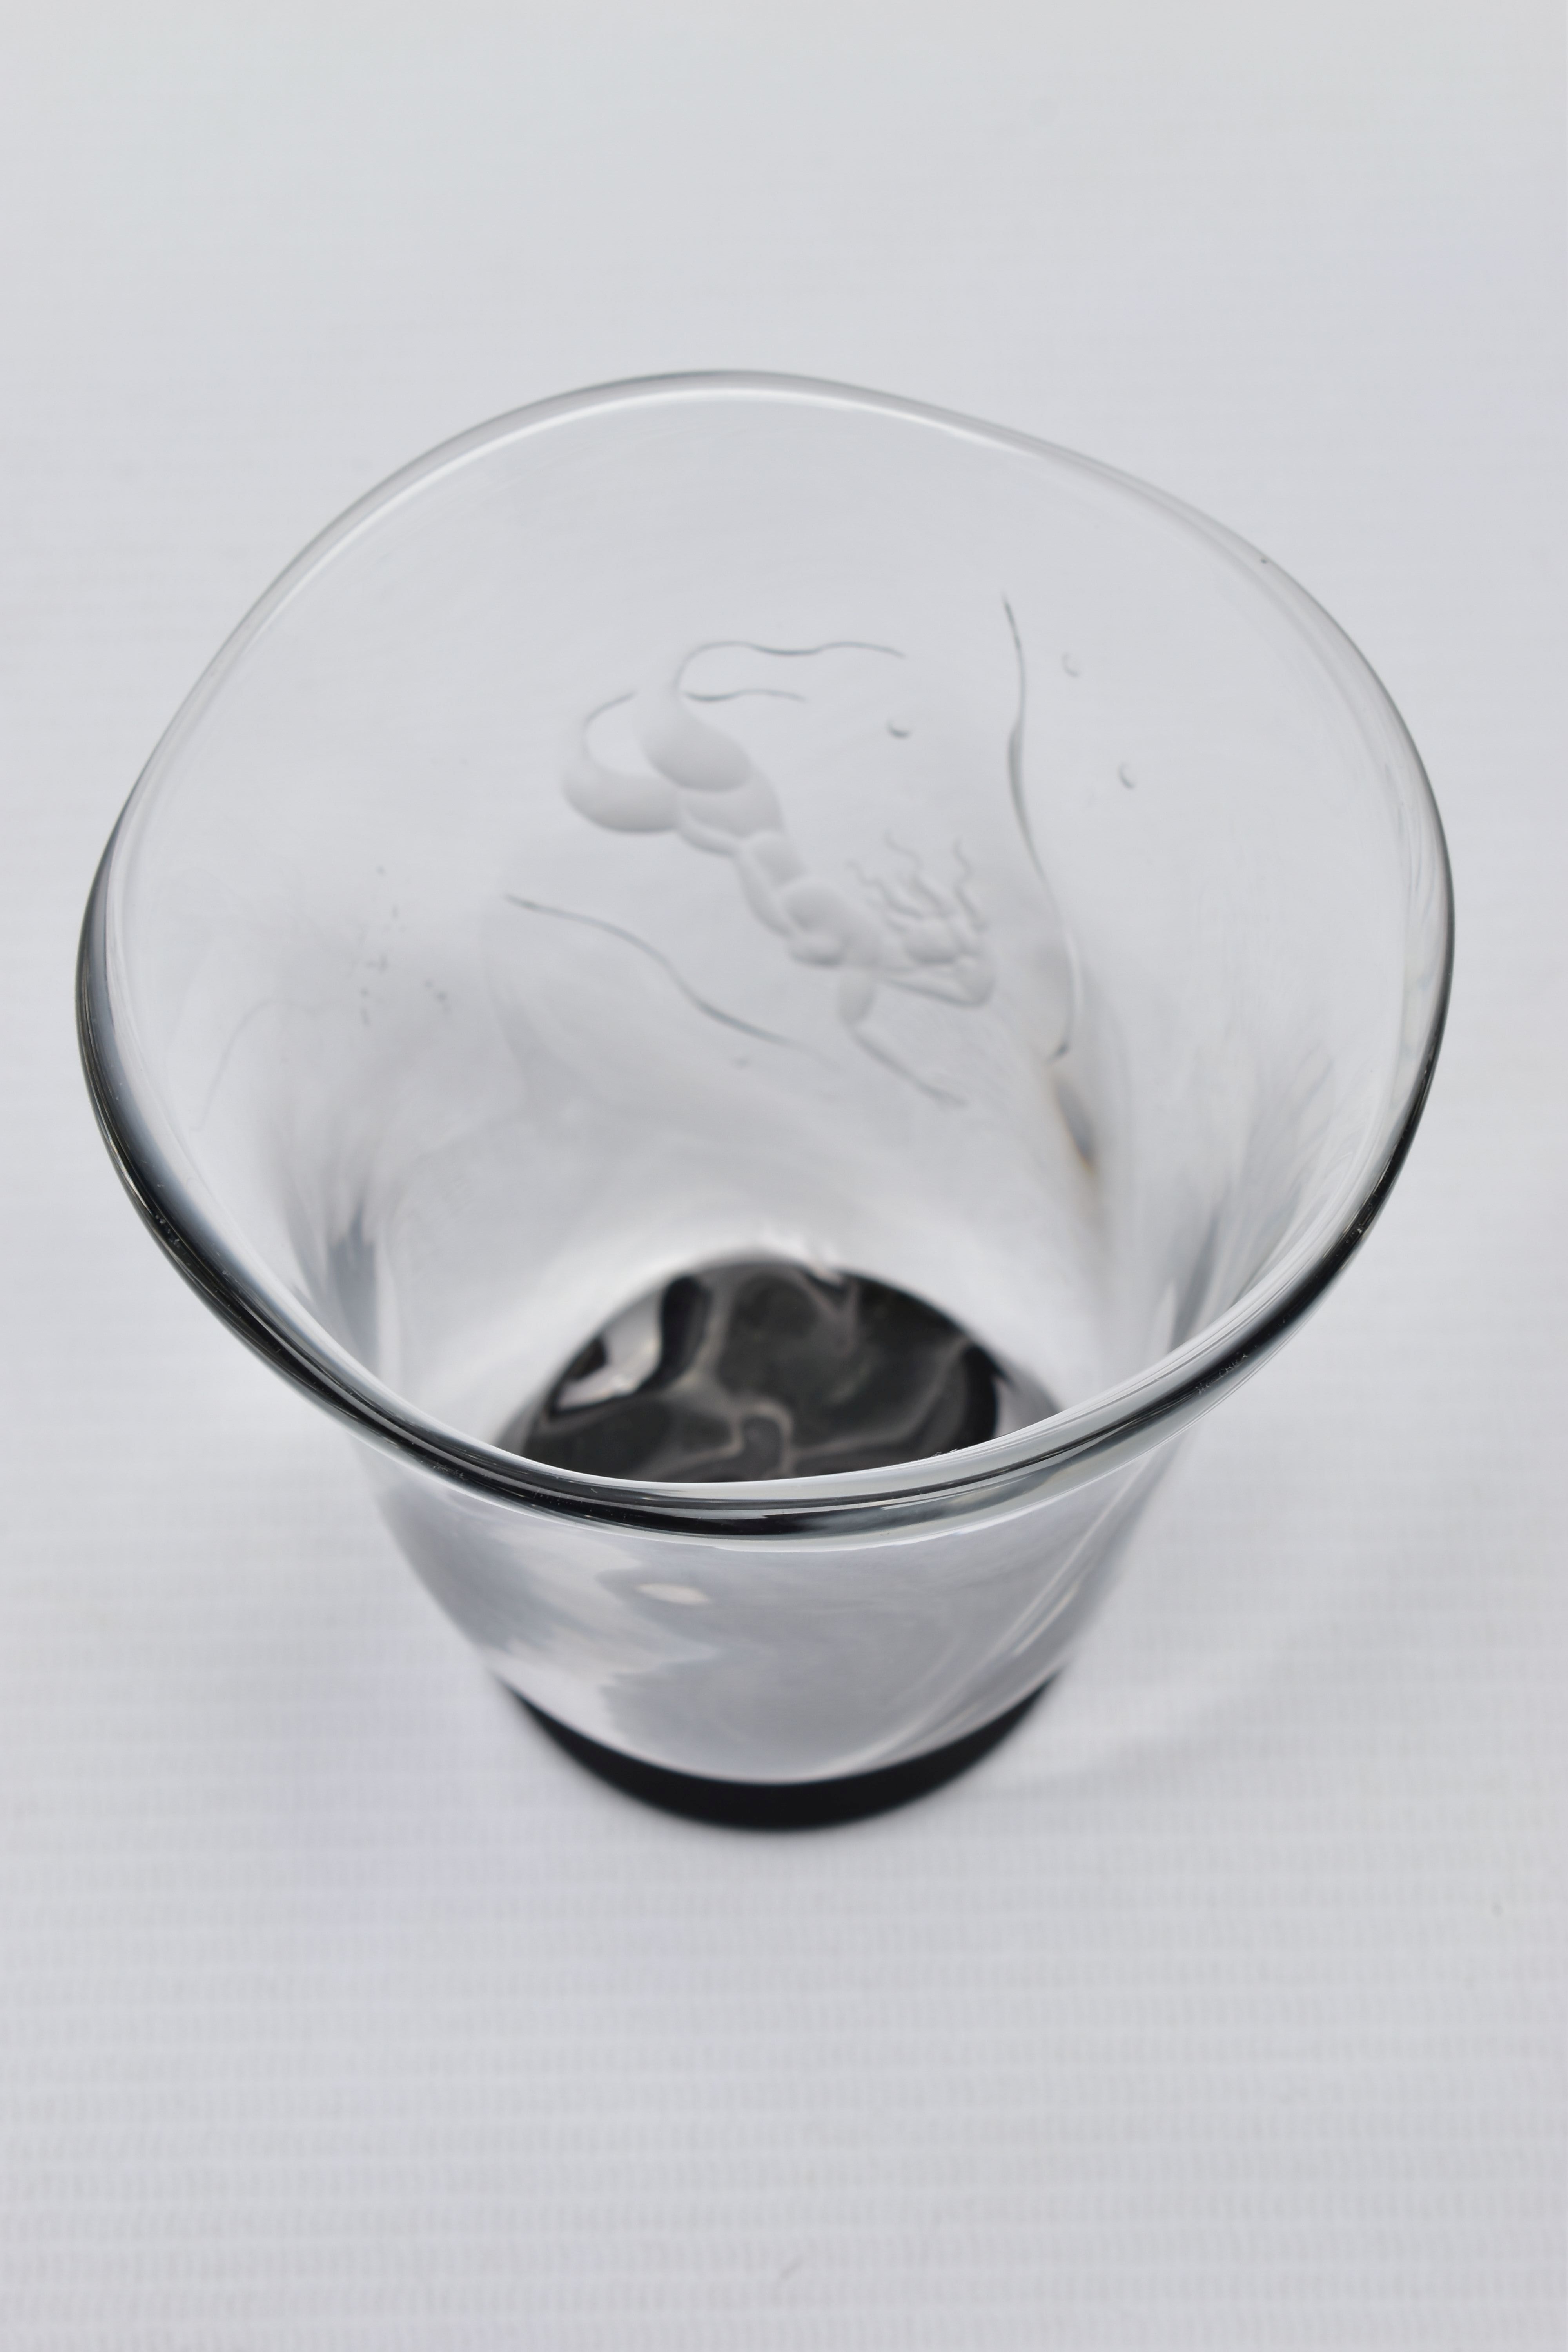 SIMON GATE (1883-1945) FOR ORREFORS, A WRYTHERN FORM VASE WITH CLEAR GLASS BODY AND BLACK FOOT - Image 2 of 9